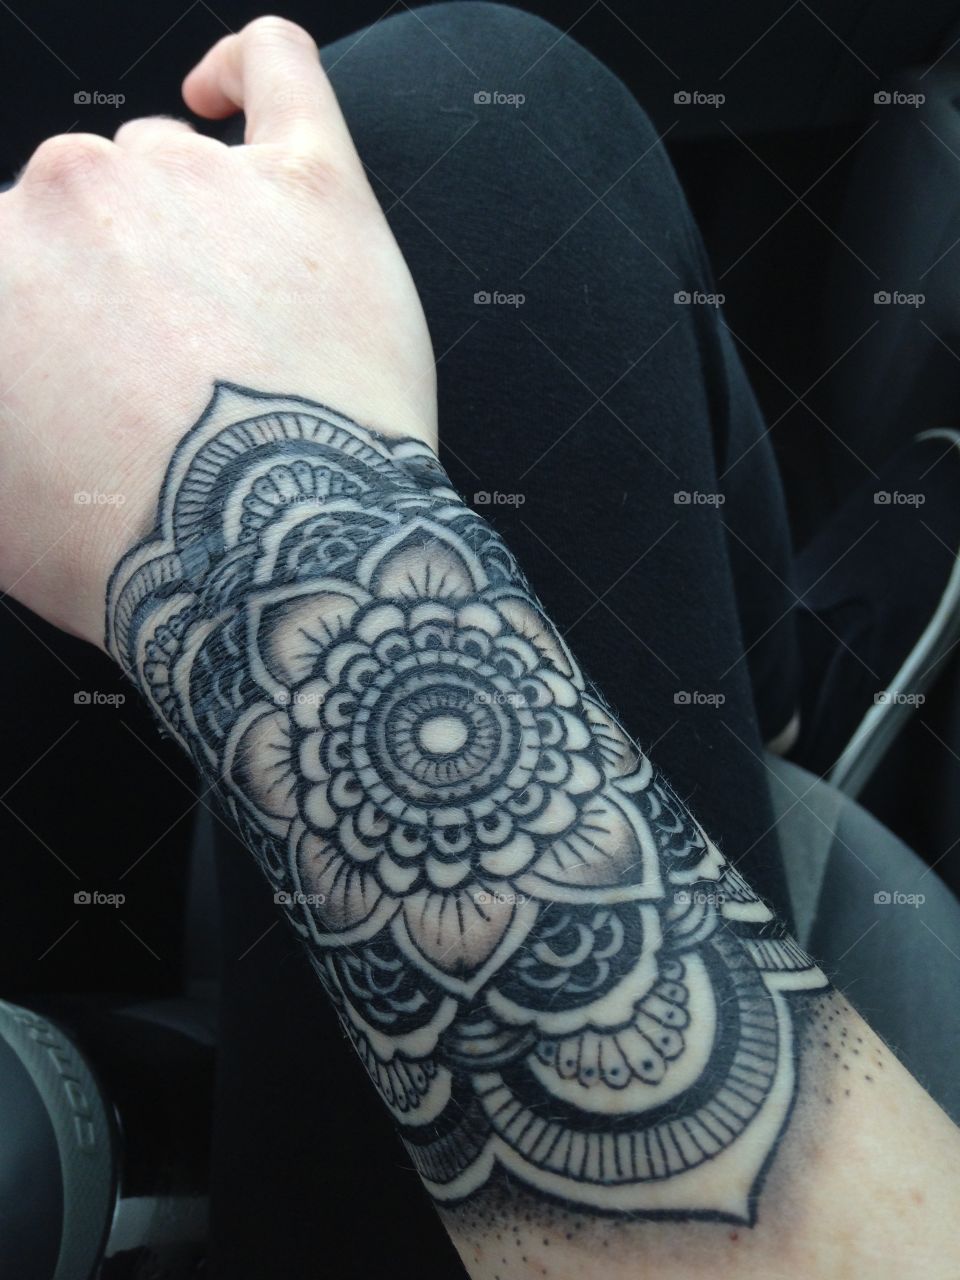 Ink Is Forever. My mandala tattoo on my right wrist. Black ink.